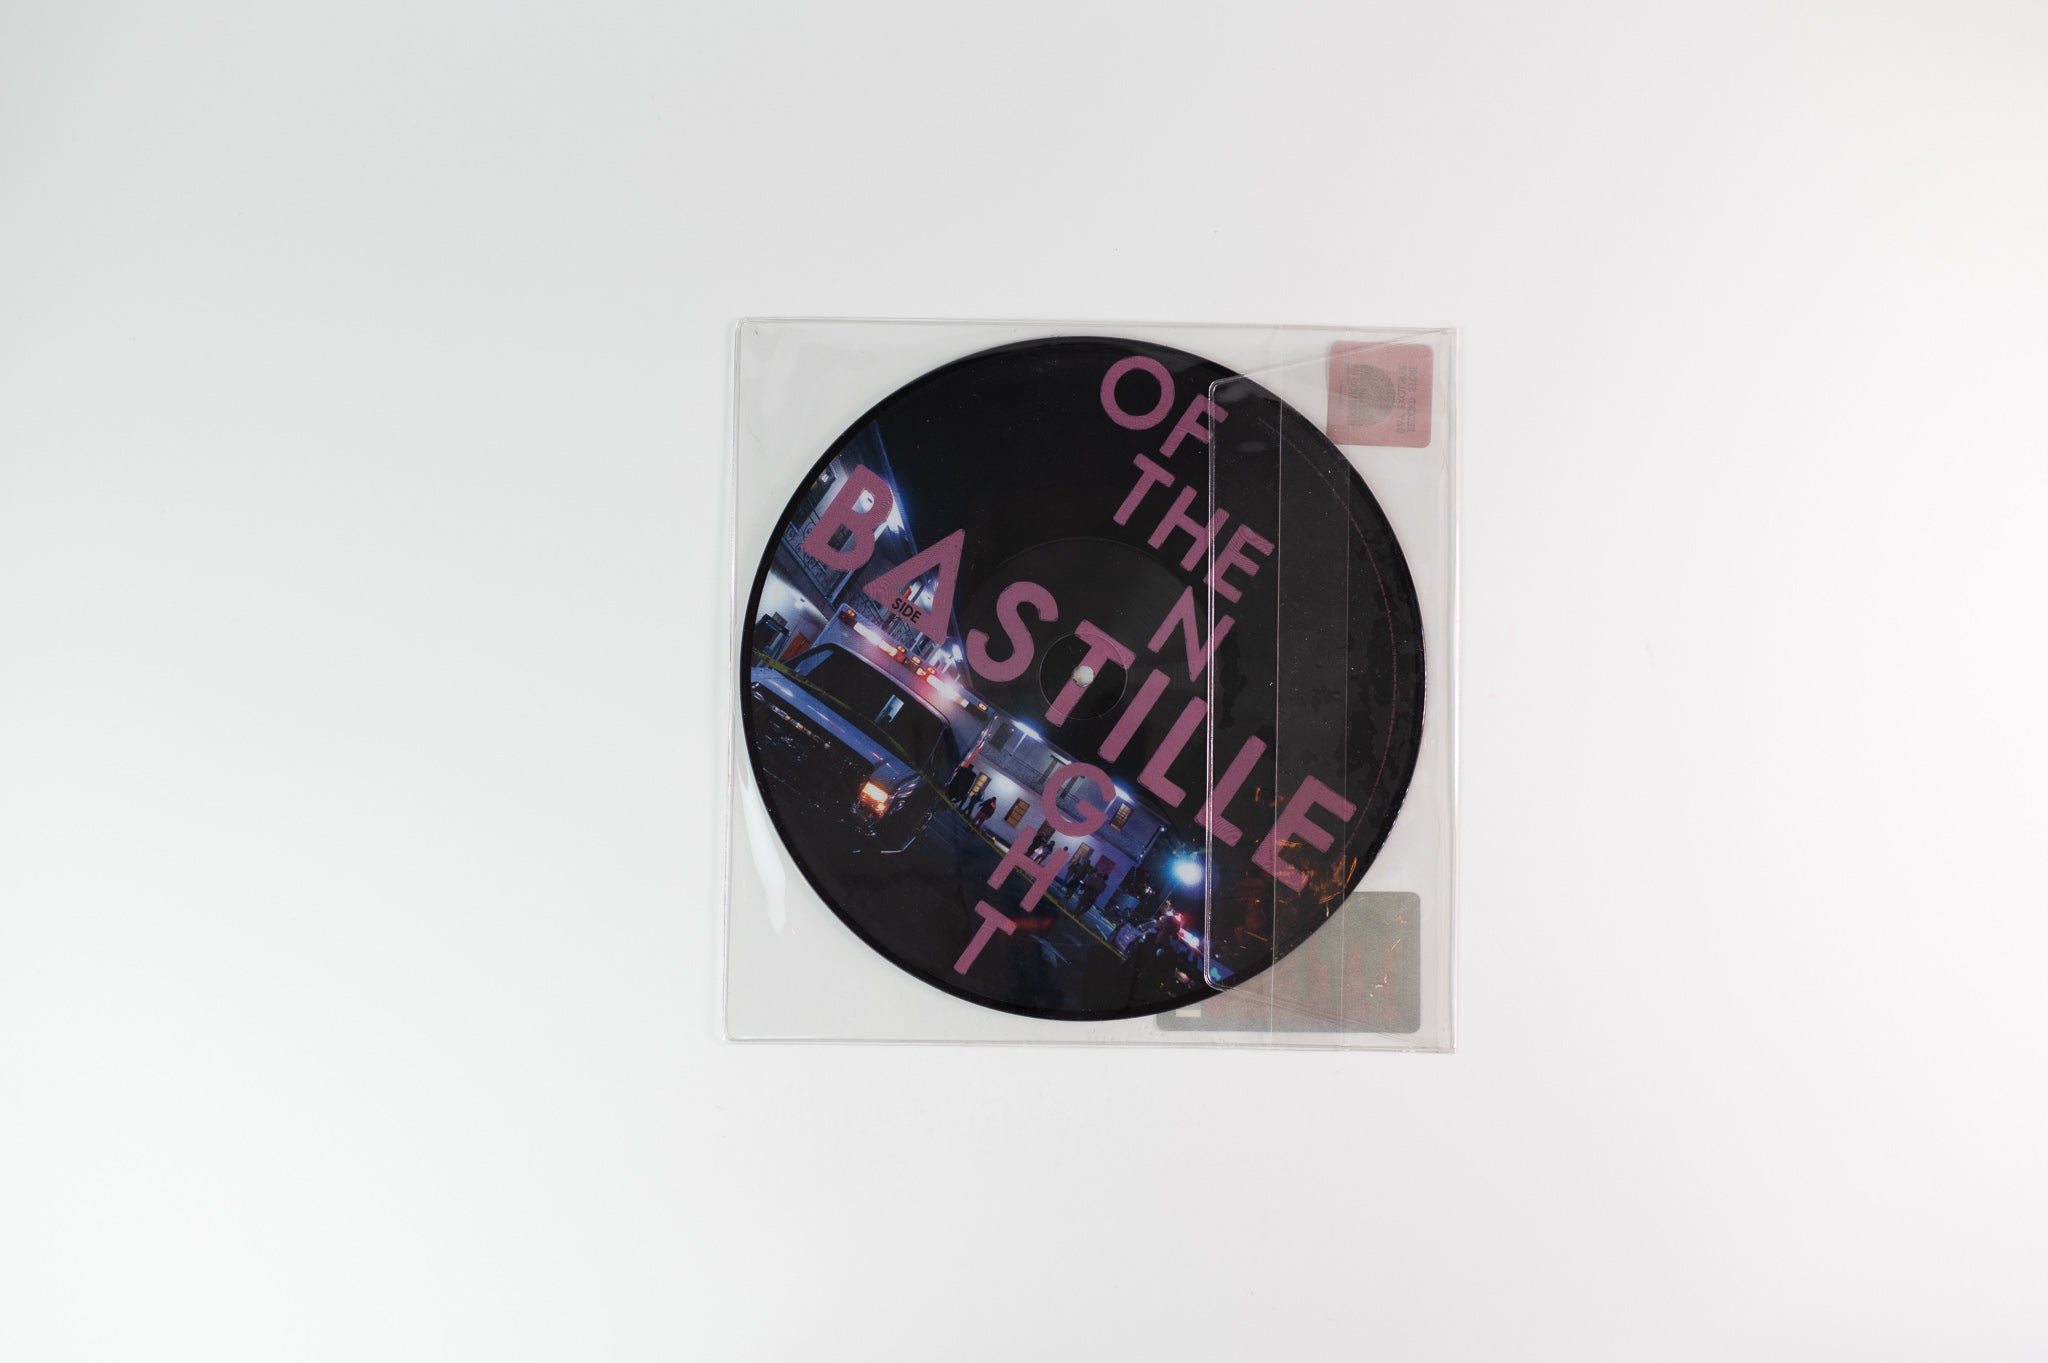 Bastille - Of The Night on Virgin Limited Edition 10" Picture Disc RSD 2014